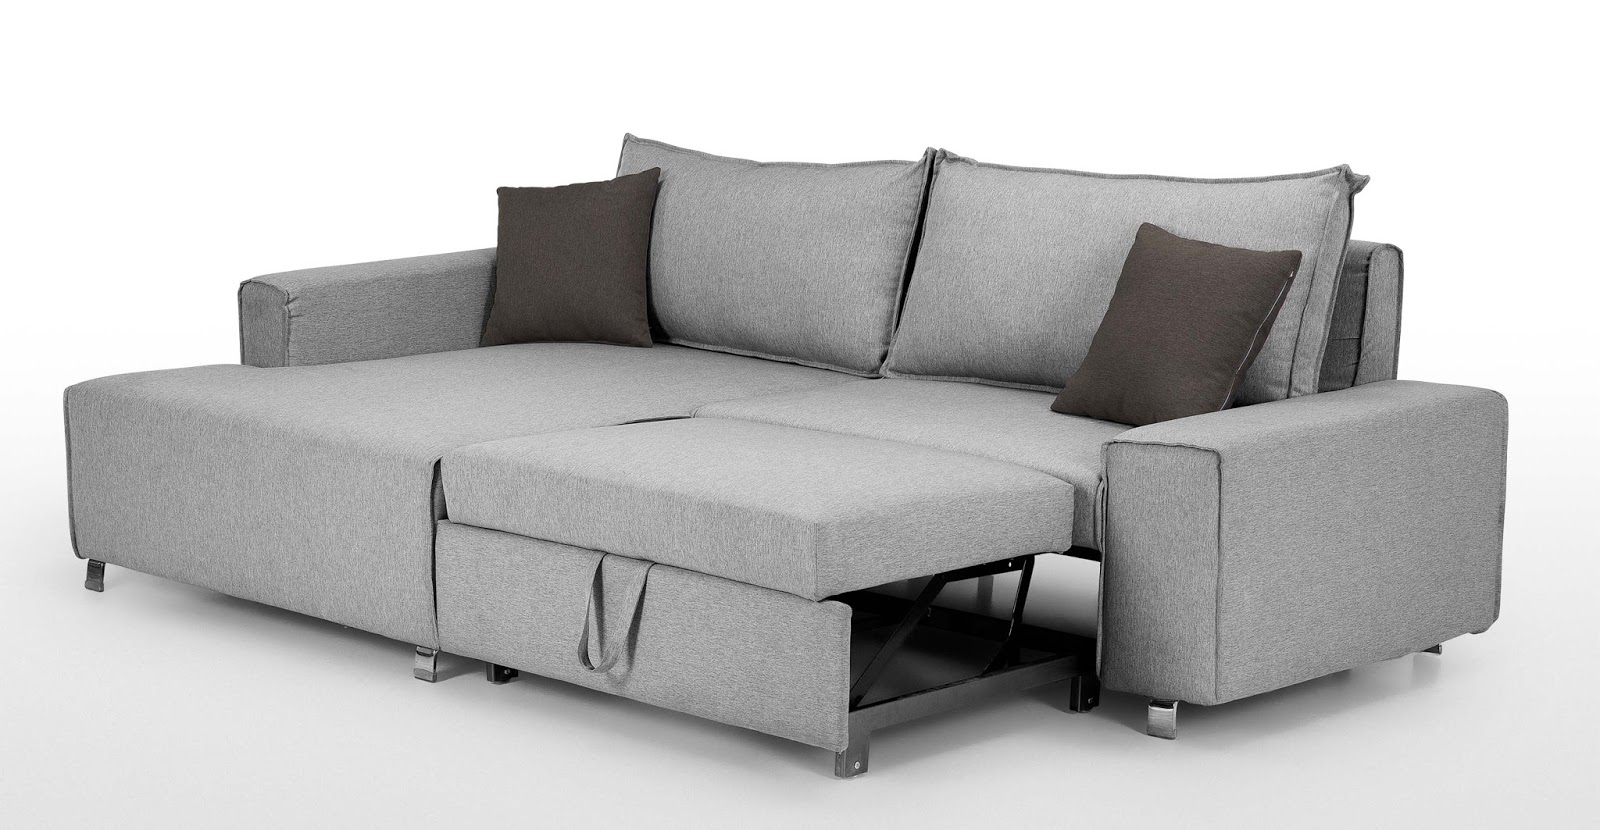 grey corner couch sofa bed